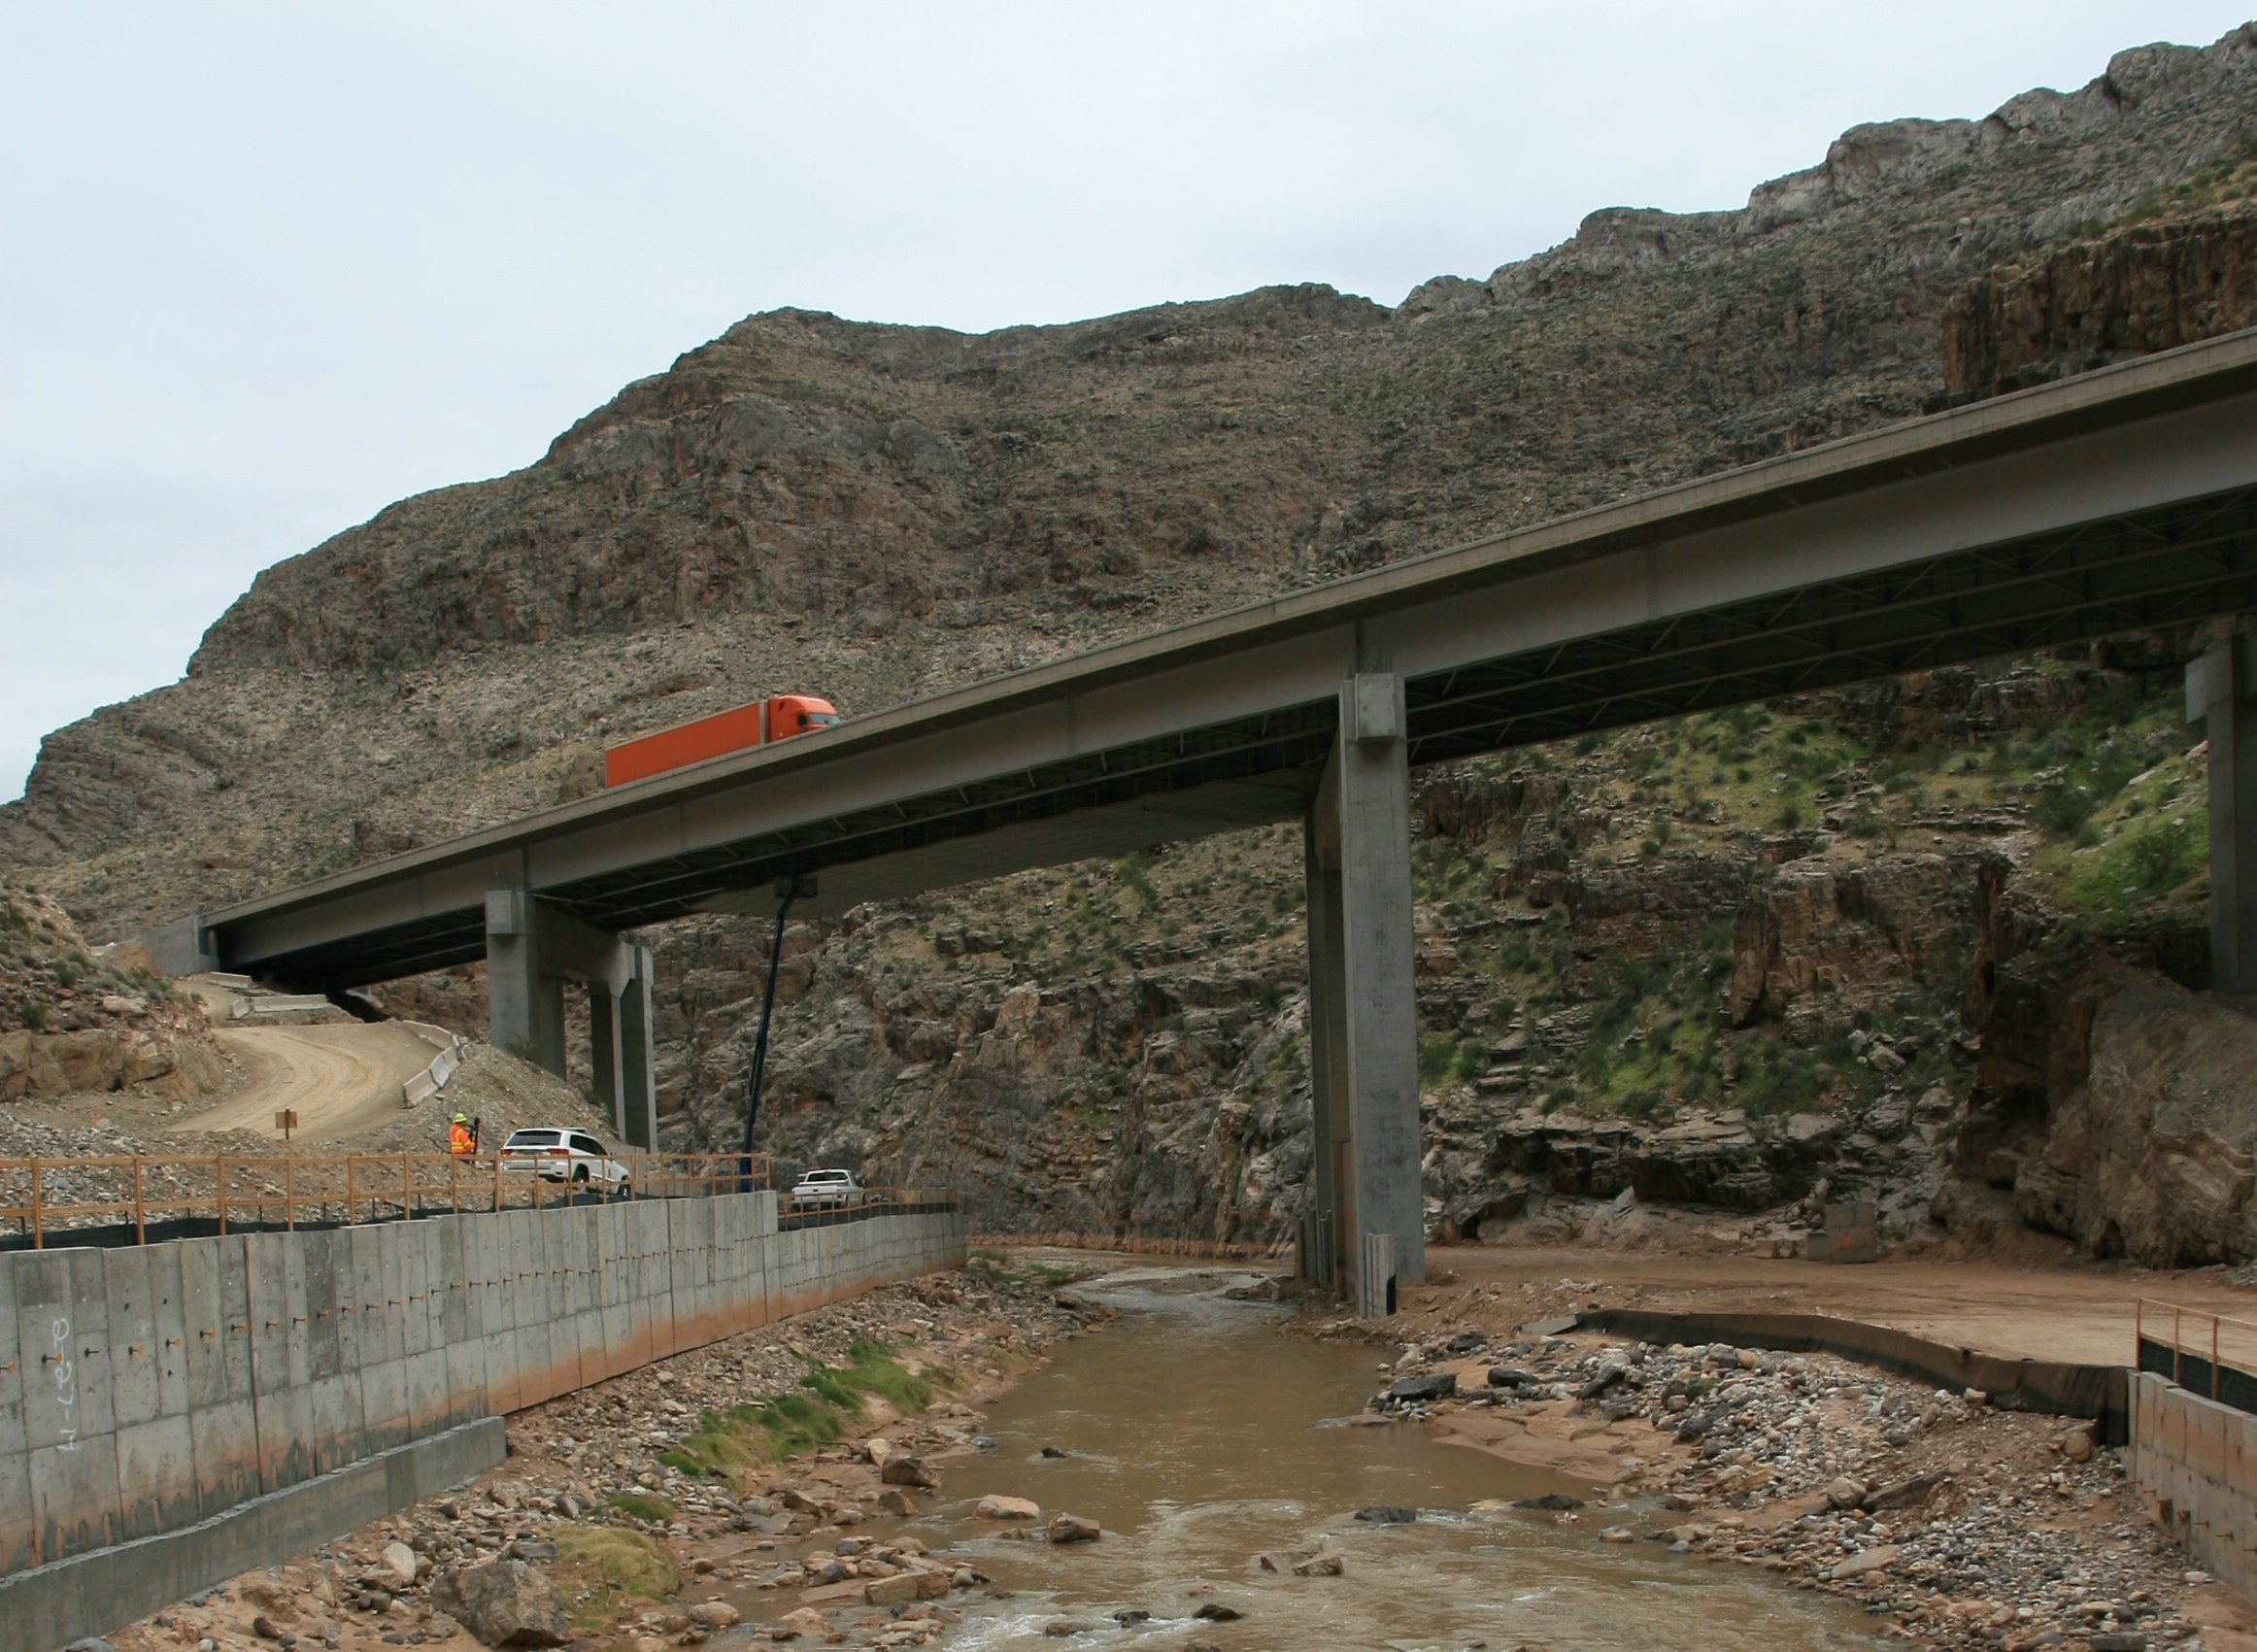 I-15 Bridge no. 6 Virgin River Gorge as seen in late 2014 as crews worked to renovate and upgrade it, Mohave County, Arizona, circa December 2014 | Photo courtesy of the Arizona Department of Transportation, St. George News